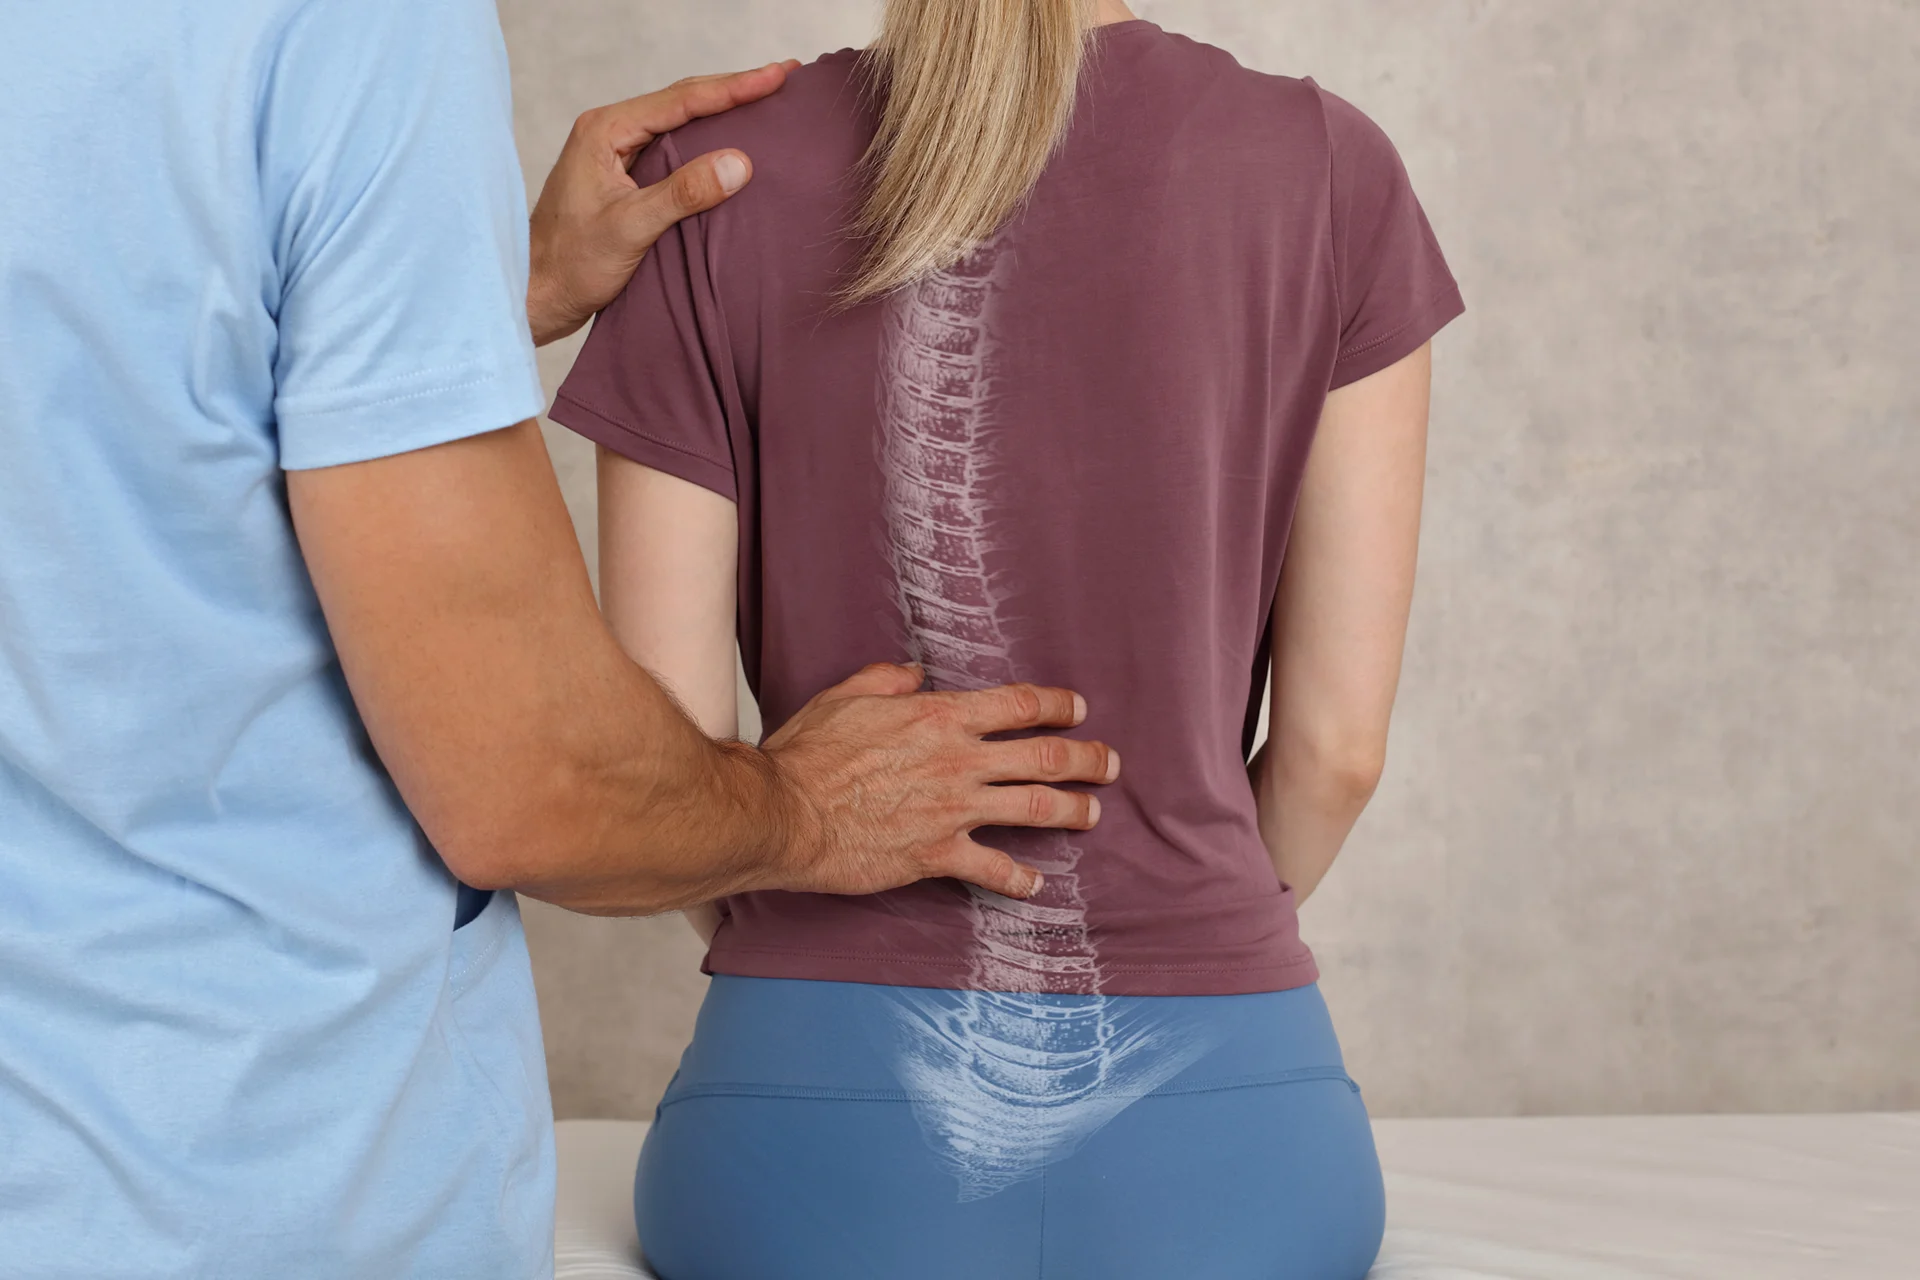 a doctor examines the patient's scoliosis condition